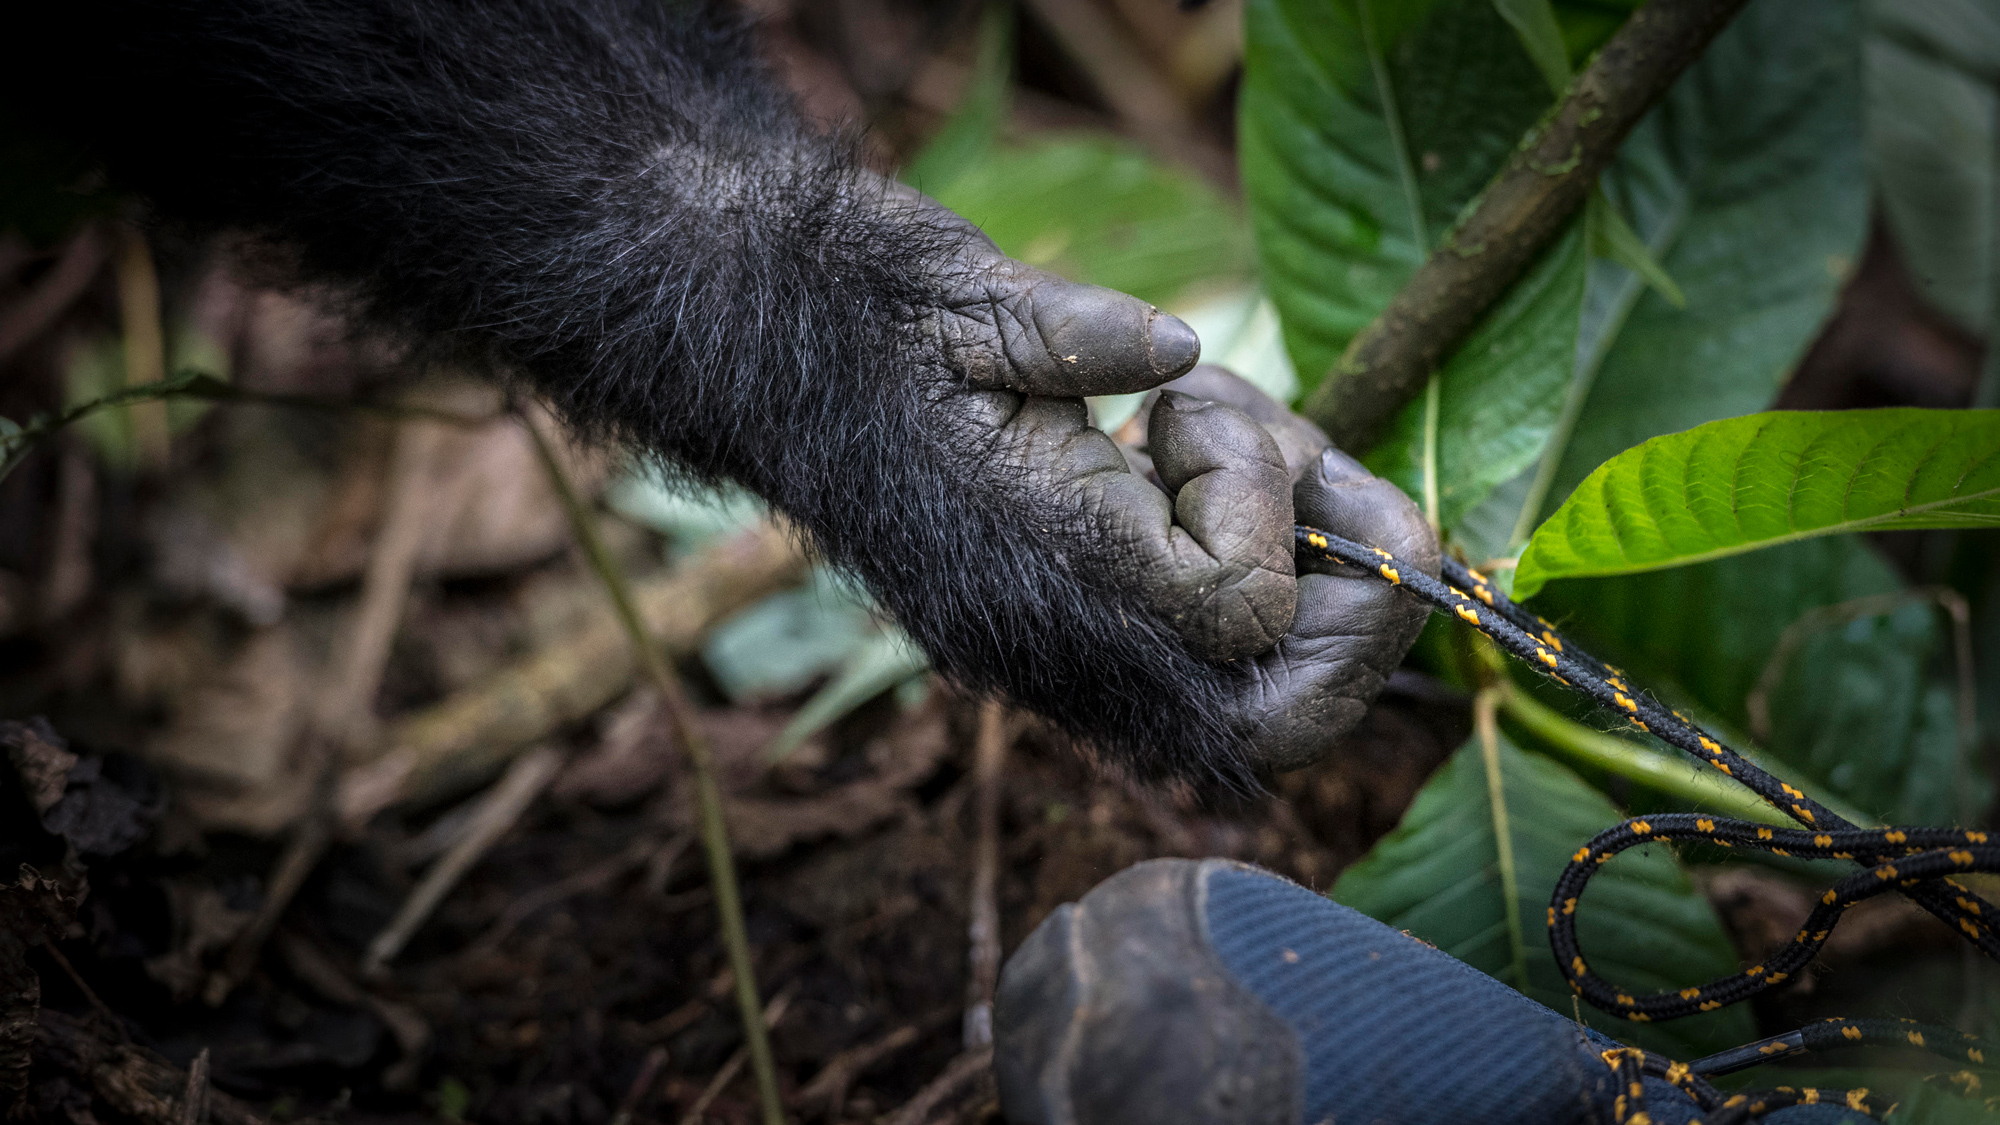 A baby mountain gorilla tugs playfully at shoe laces in Bwindi